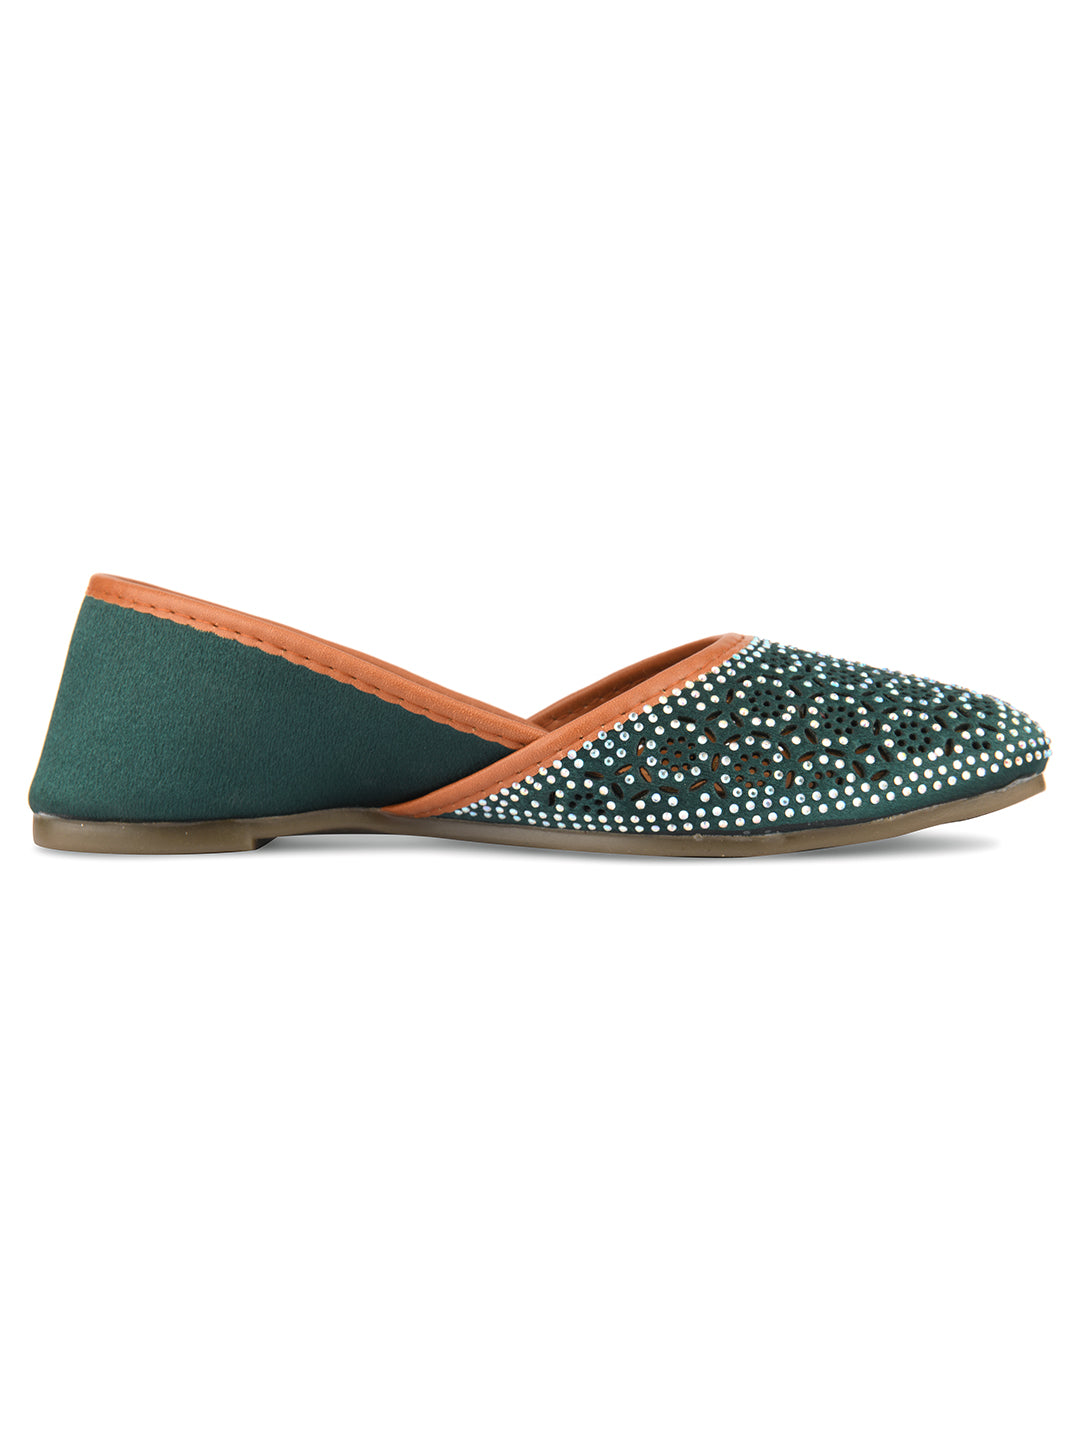 Women's Teal Handcrafted Stone Work  Indian Ethnic Comfort Footwear - Desi Colour